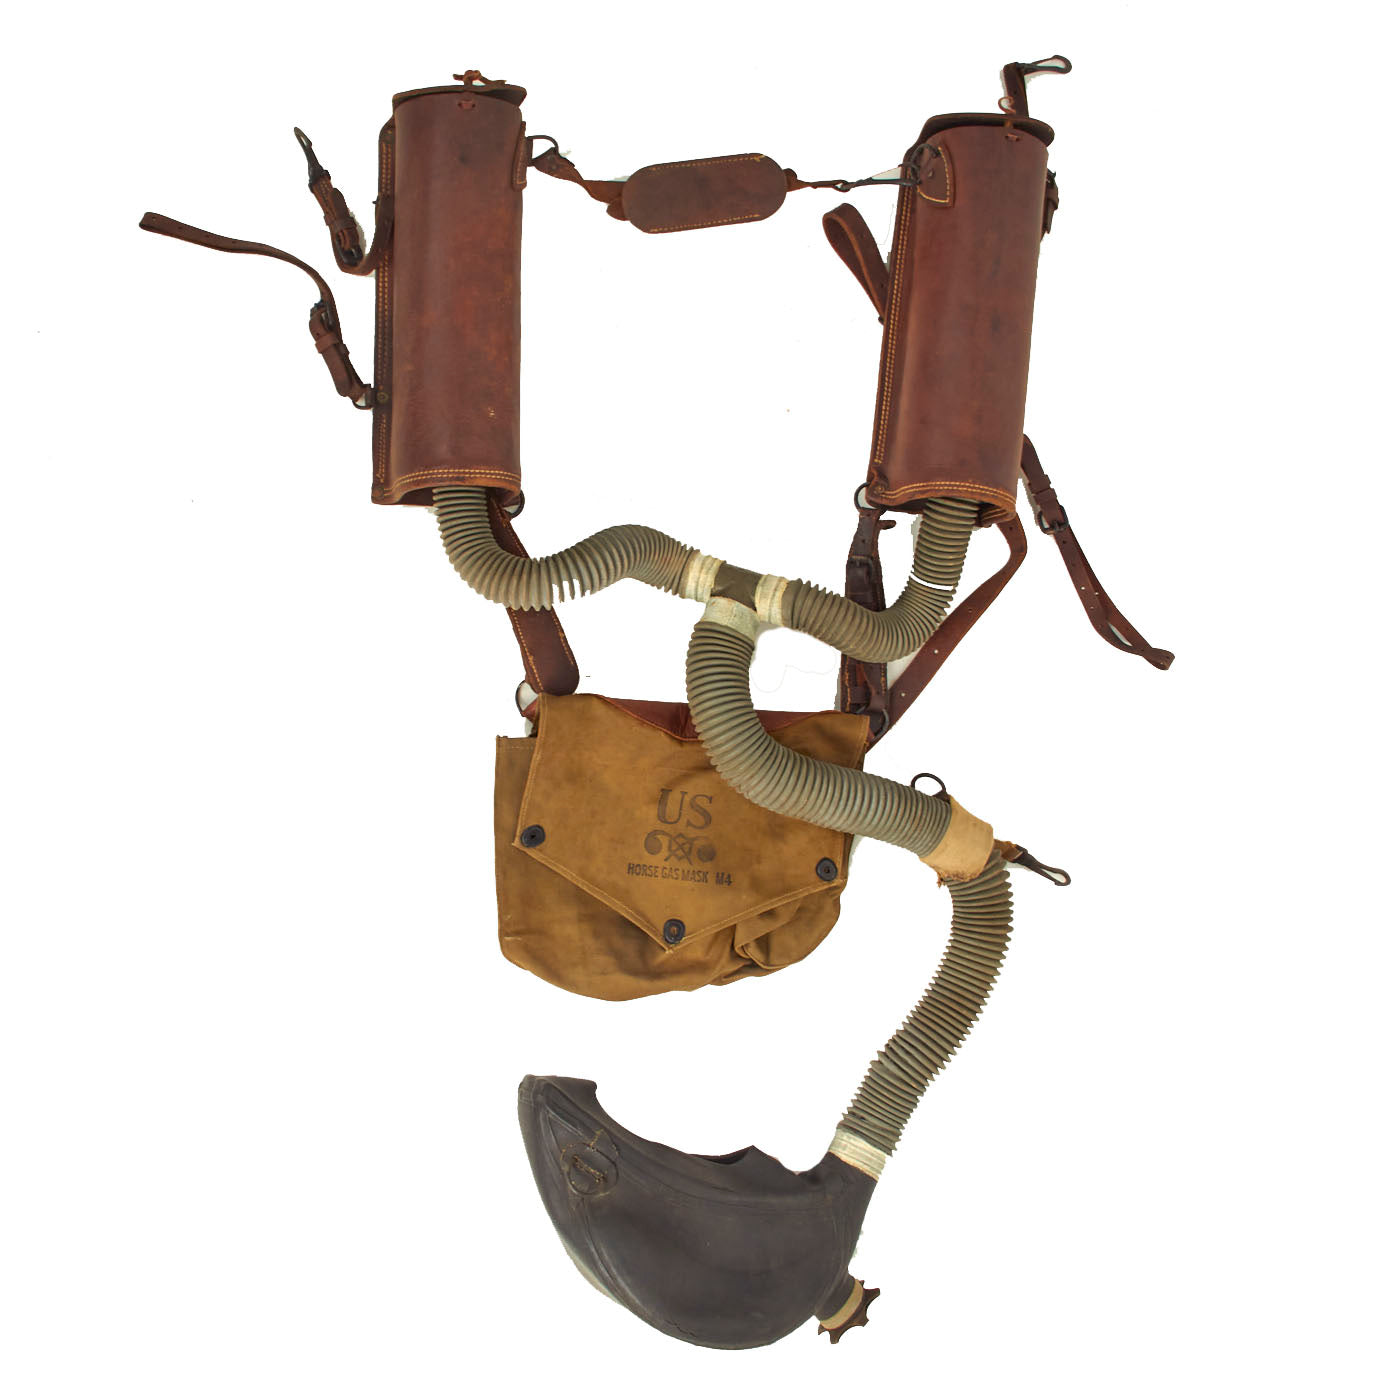 Original RARE U.S. US Cavalry M4 Gas Mask With and Canister – International Military Antiques